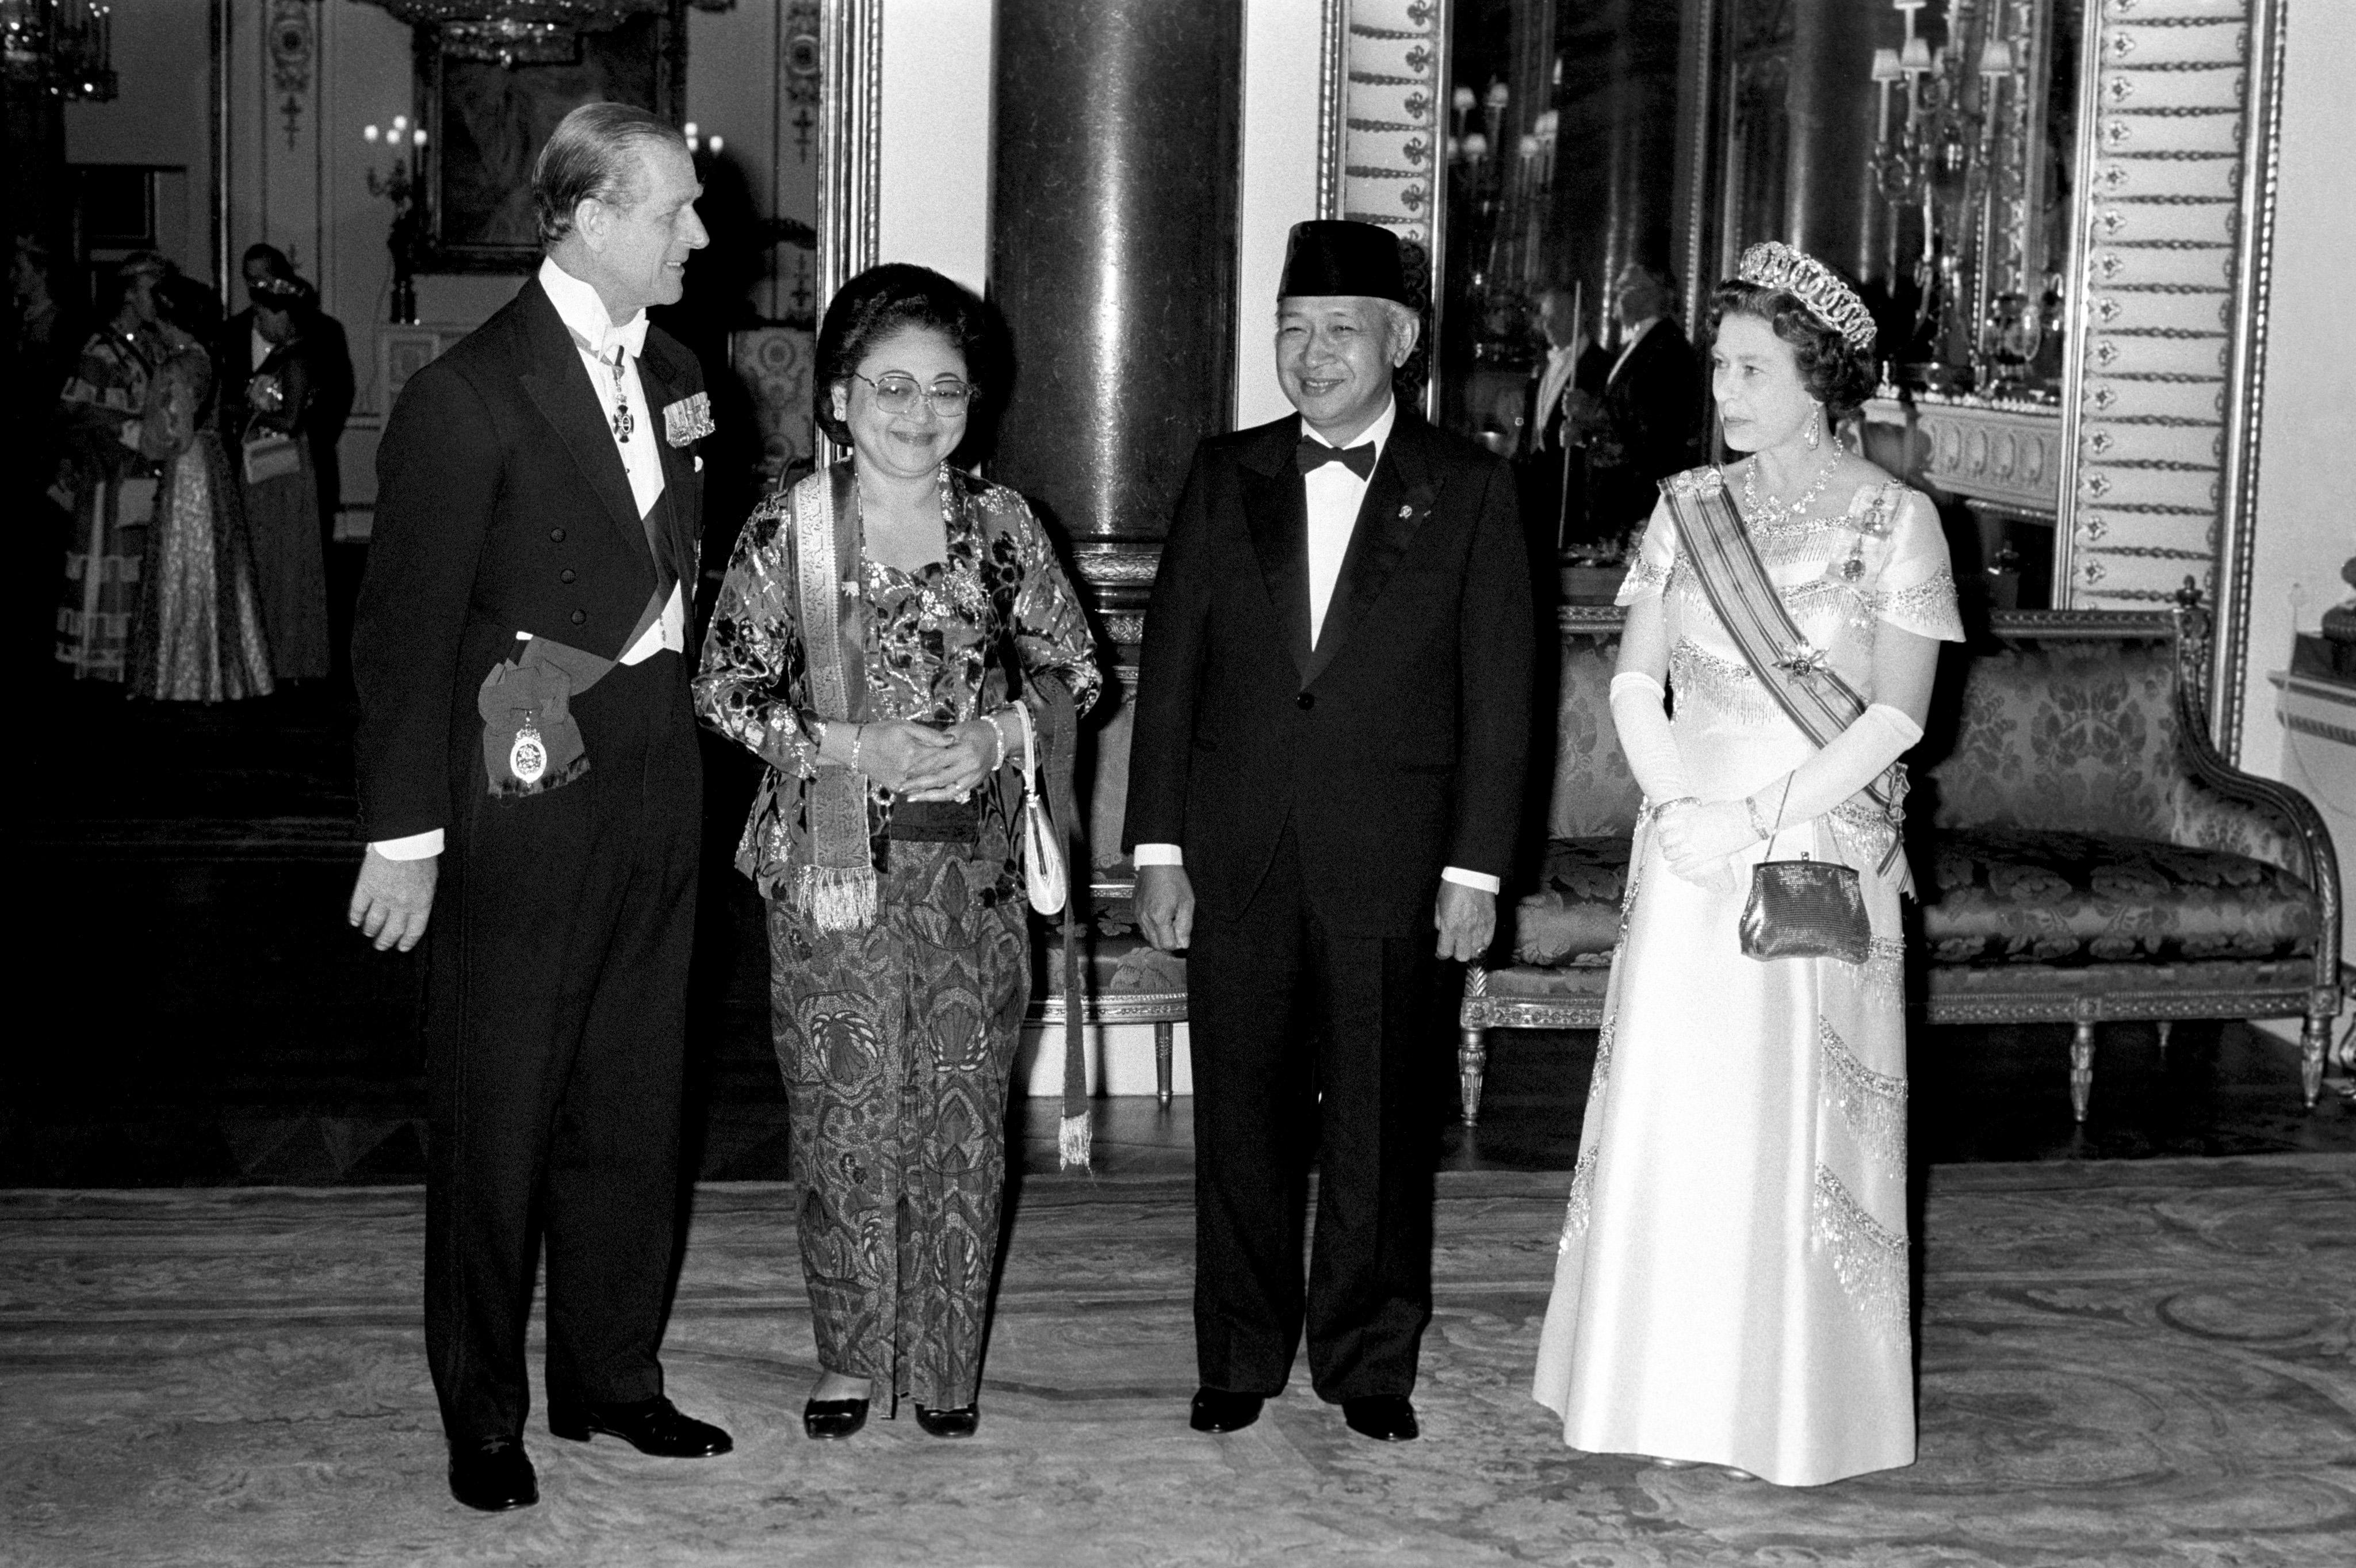 President General Soeharto of Indonesia and his wife, Madame Tien Soeharto, with Queen Elizabeth II and the Duke of Edinburgh at Buckingham Palace before a State banquet in their honor, 1979 (PA Images/Alamy)